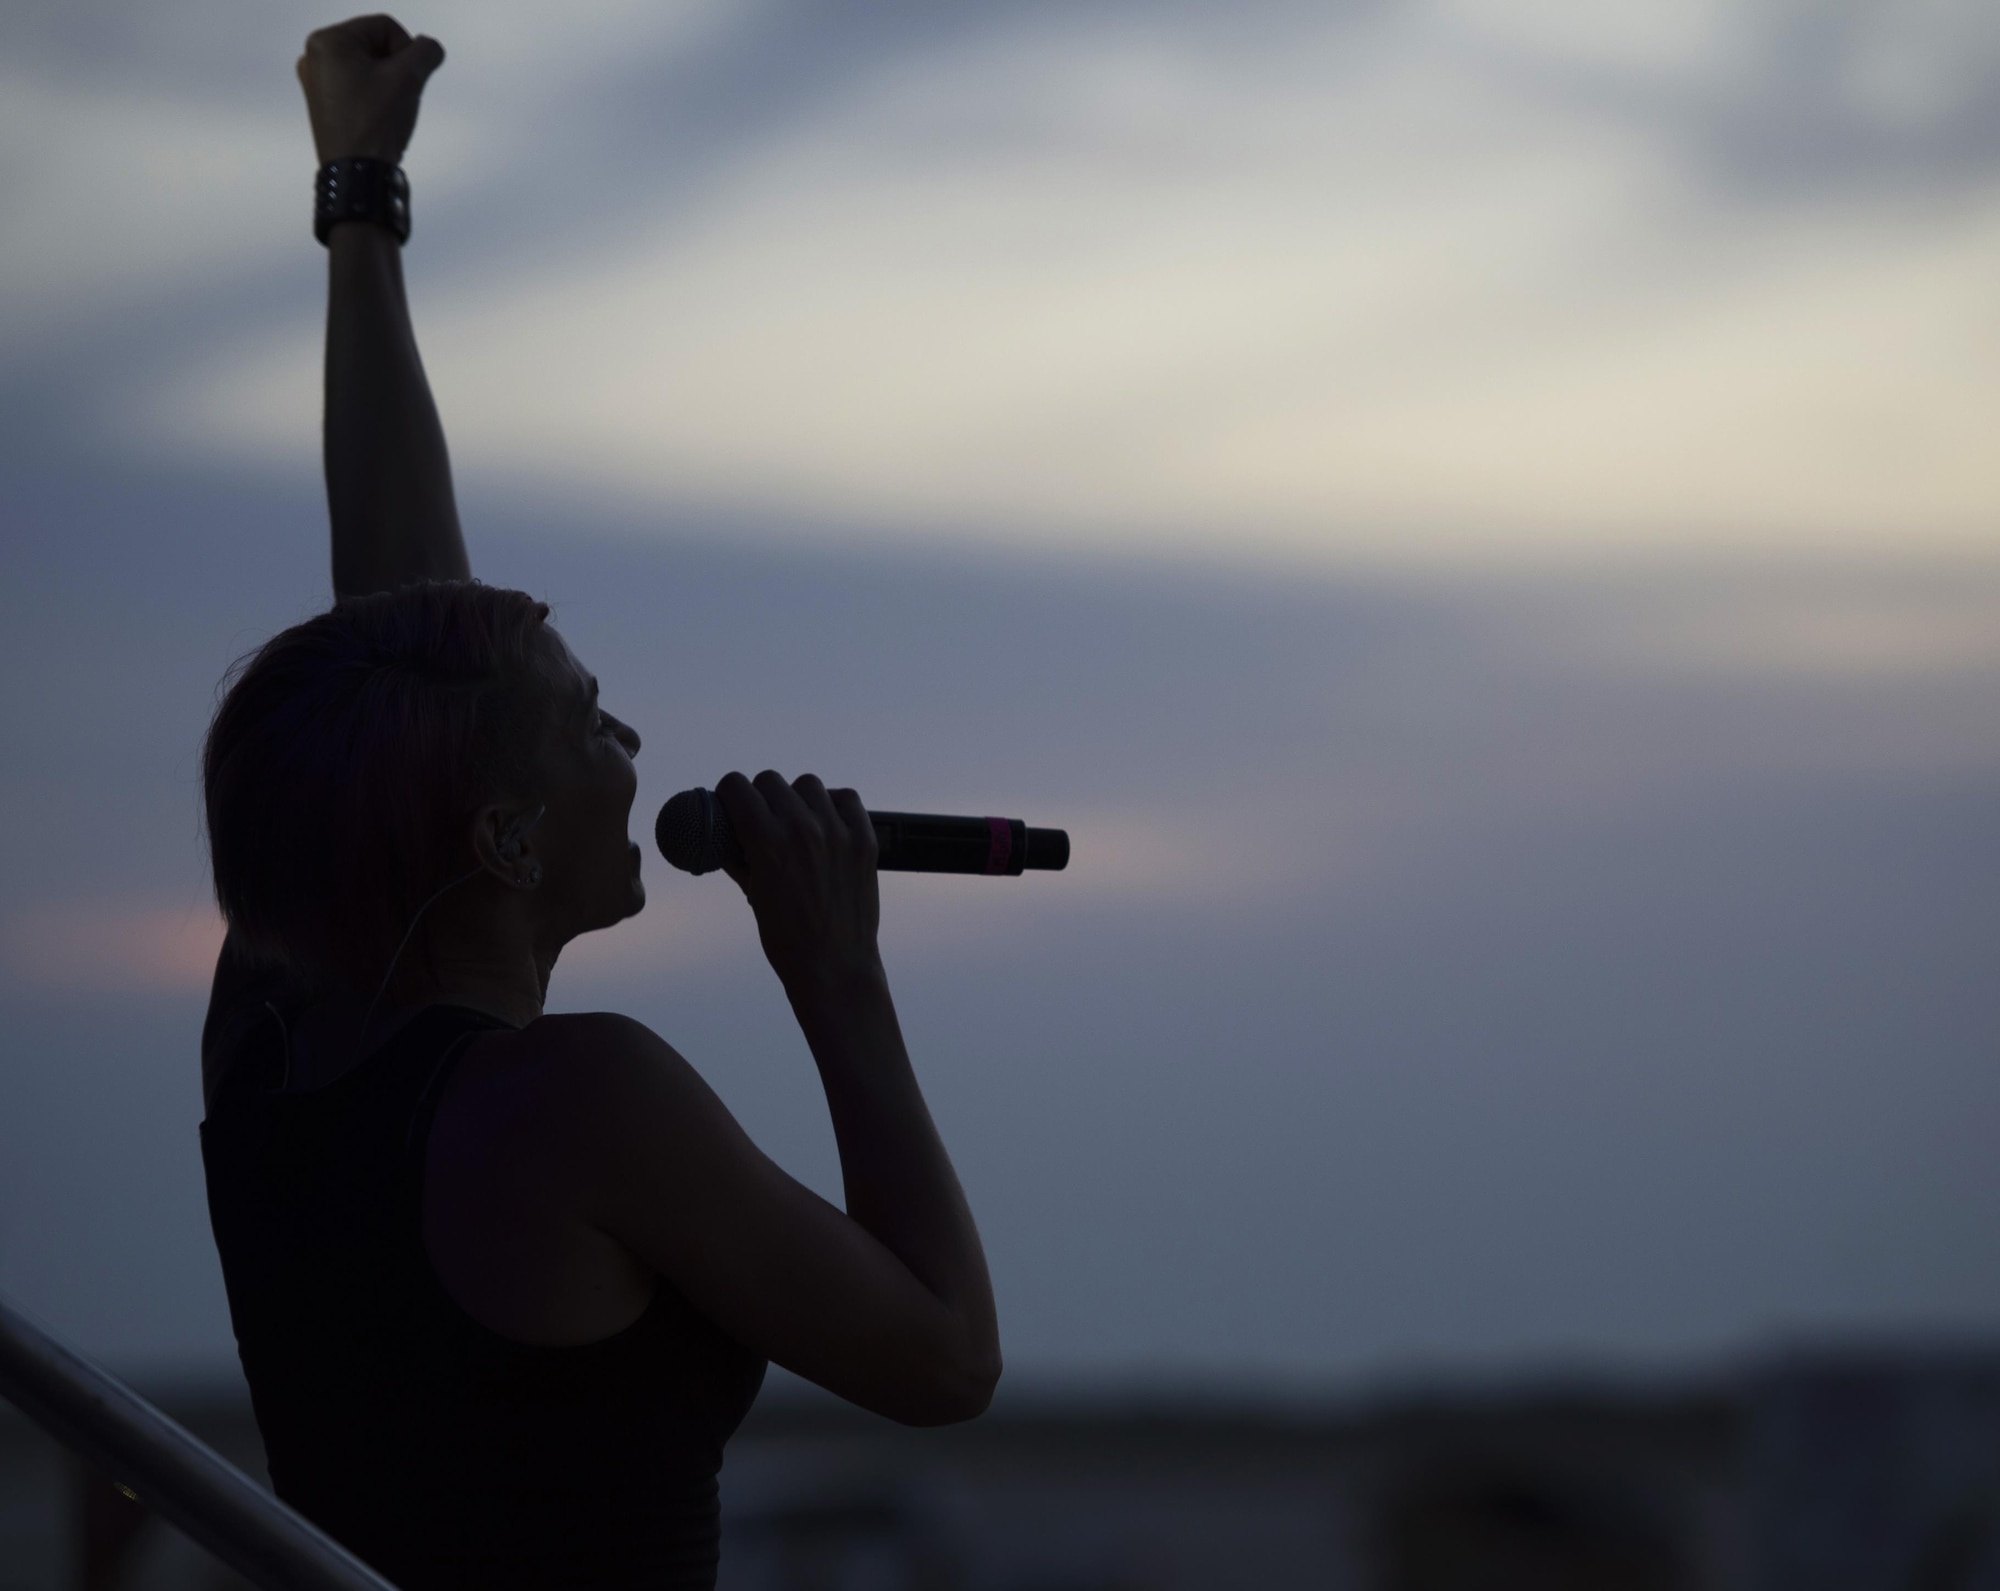 Molly Callinan, a vocalist with the Lt. Dan Band, pumps up the crowd during a performance at MacDill Air Force Base, Fla., April 29, 2017. The band, founded by actor Gary Sinise, tours various military installations to give back to the military community. (U.S. Air Force photo by Airman 1st Class Adam R. Shanks)